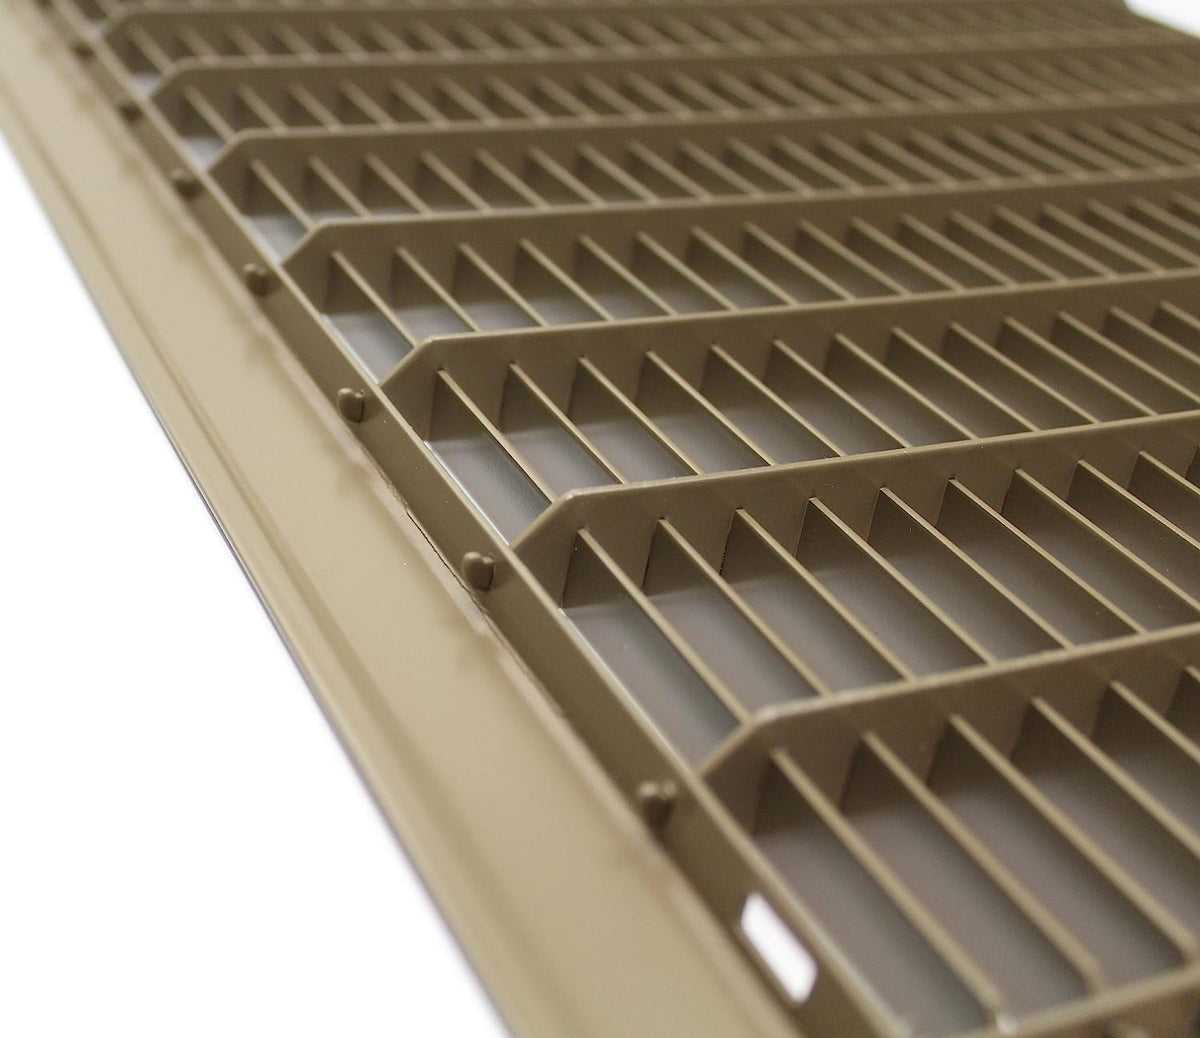 4&quot; X 18&quot; Or 18&quot; X 4&quot; Heavy Duty Floor Grille - Fixed Blades Air Grille - Brown [Outer Dimensions: 5.75 X 19.75]